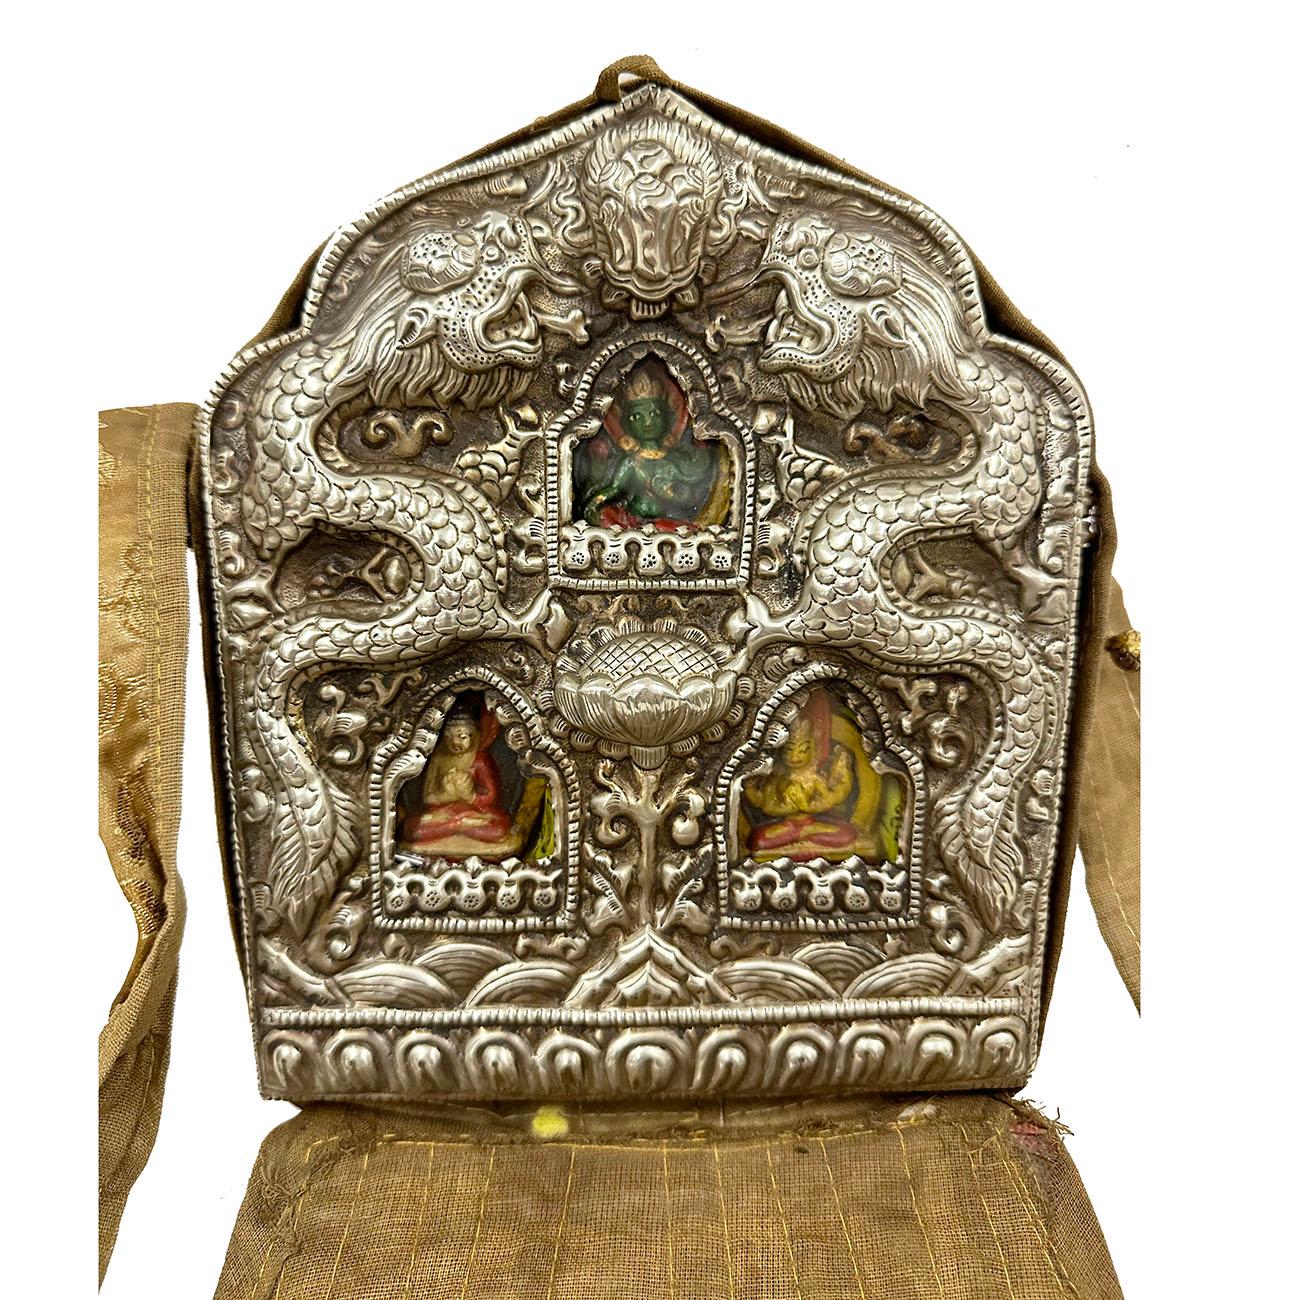 Ghau is a prayer box worn as pendant by Buddhists as portable shrines which can be pray by prayer during their travel. This large Ghau prayer box (travel Buddha shrine) made from Tibetan silver with THREE Buddhas, Turquoise, bronze, red Buddha